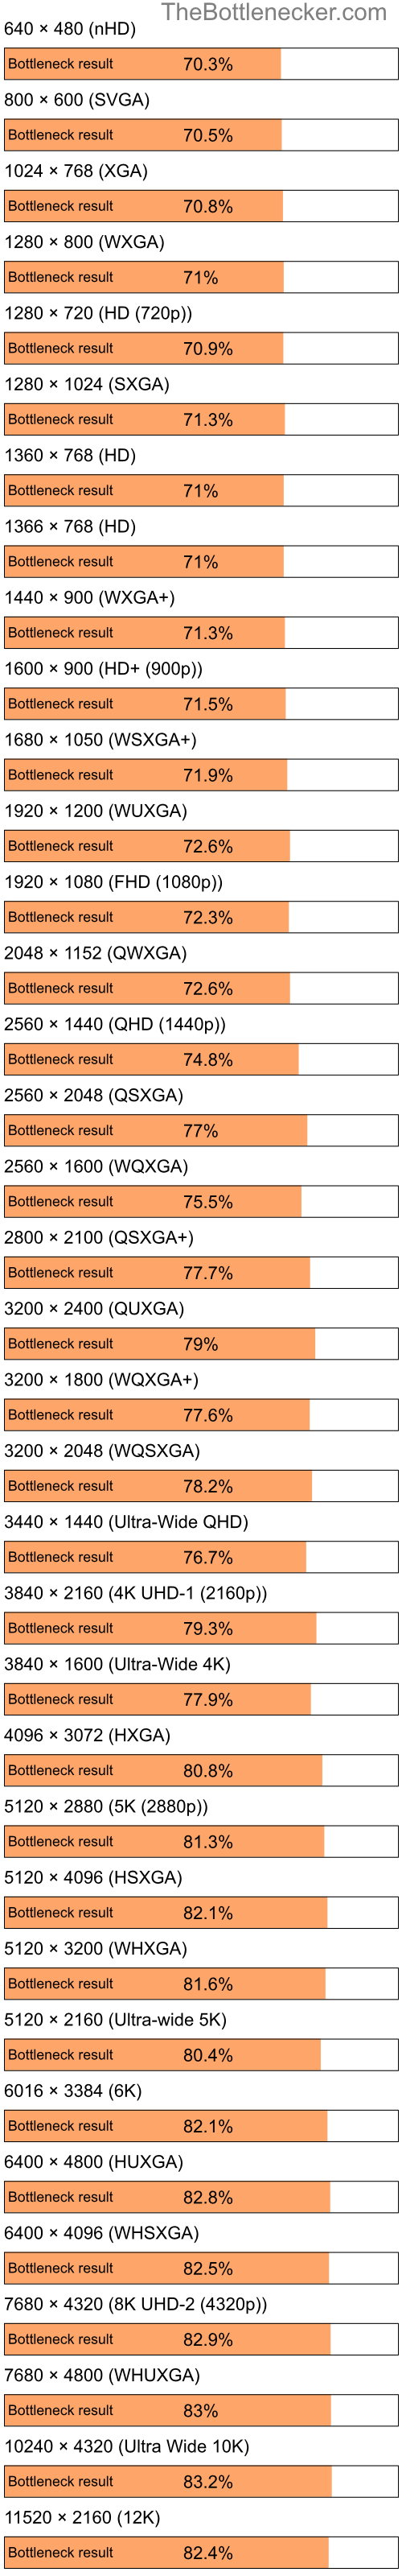 Bottleneck results by resolution for Intel Pentium 4 and AMD M860G with Mobility Radeon 4100 in Graphic Card Intense Tasks